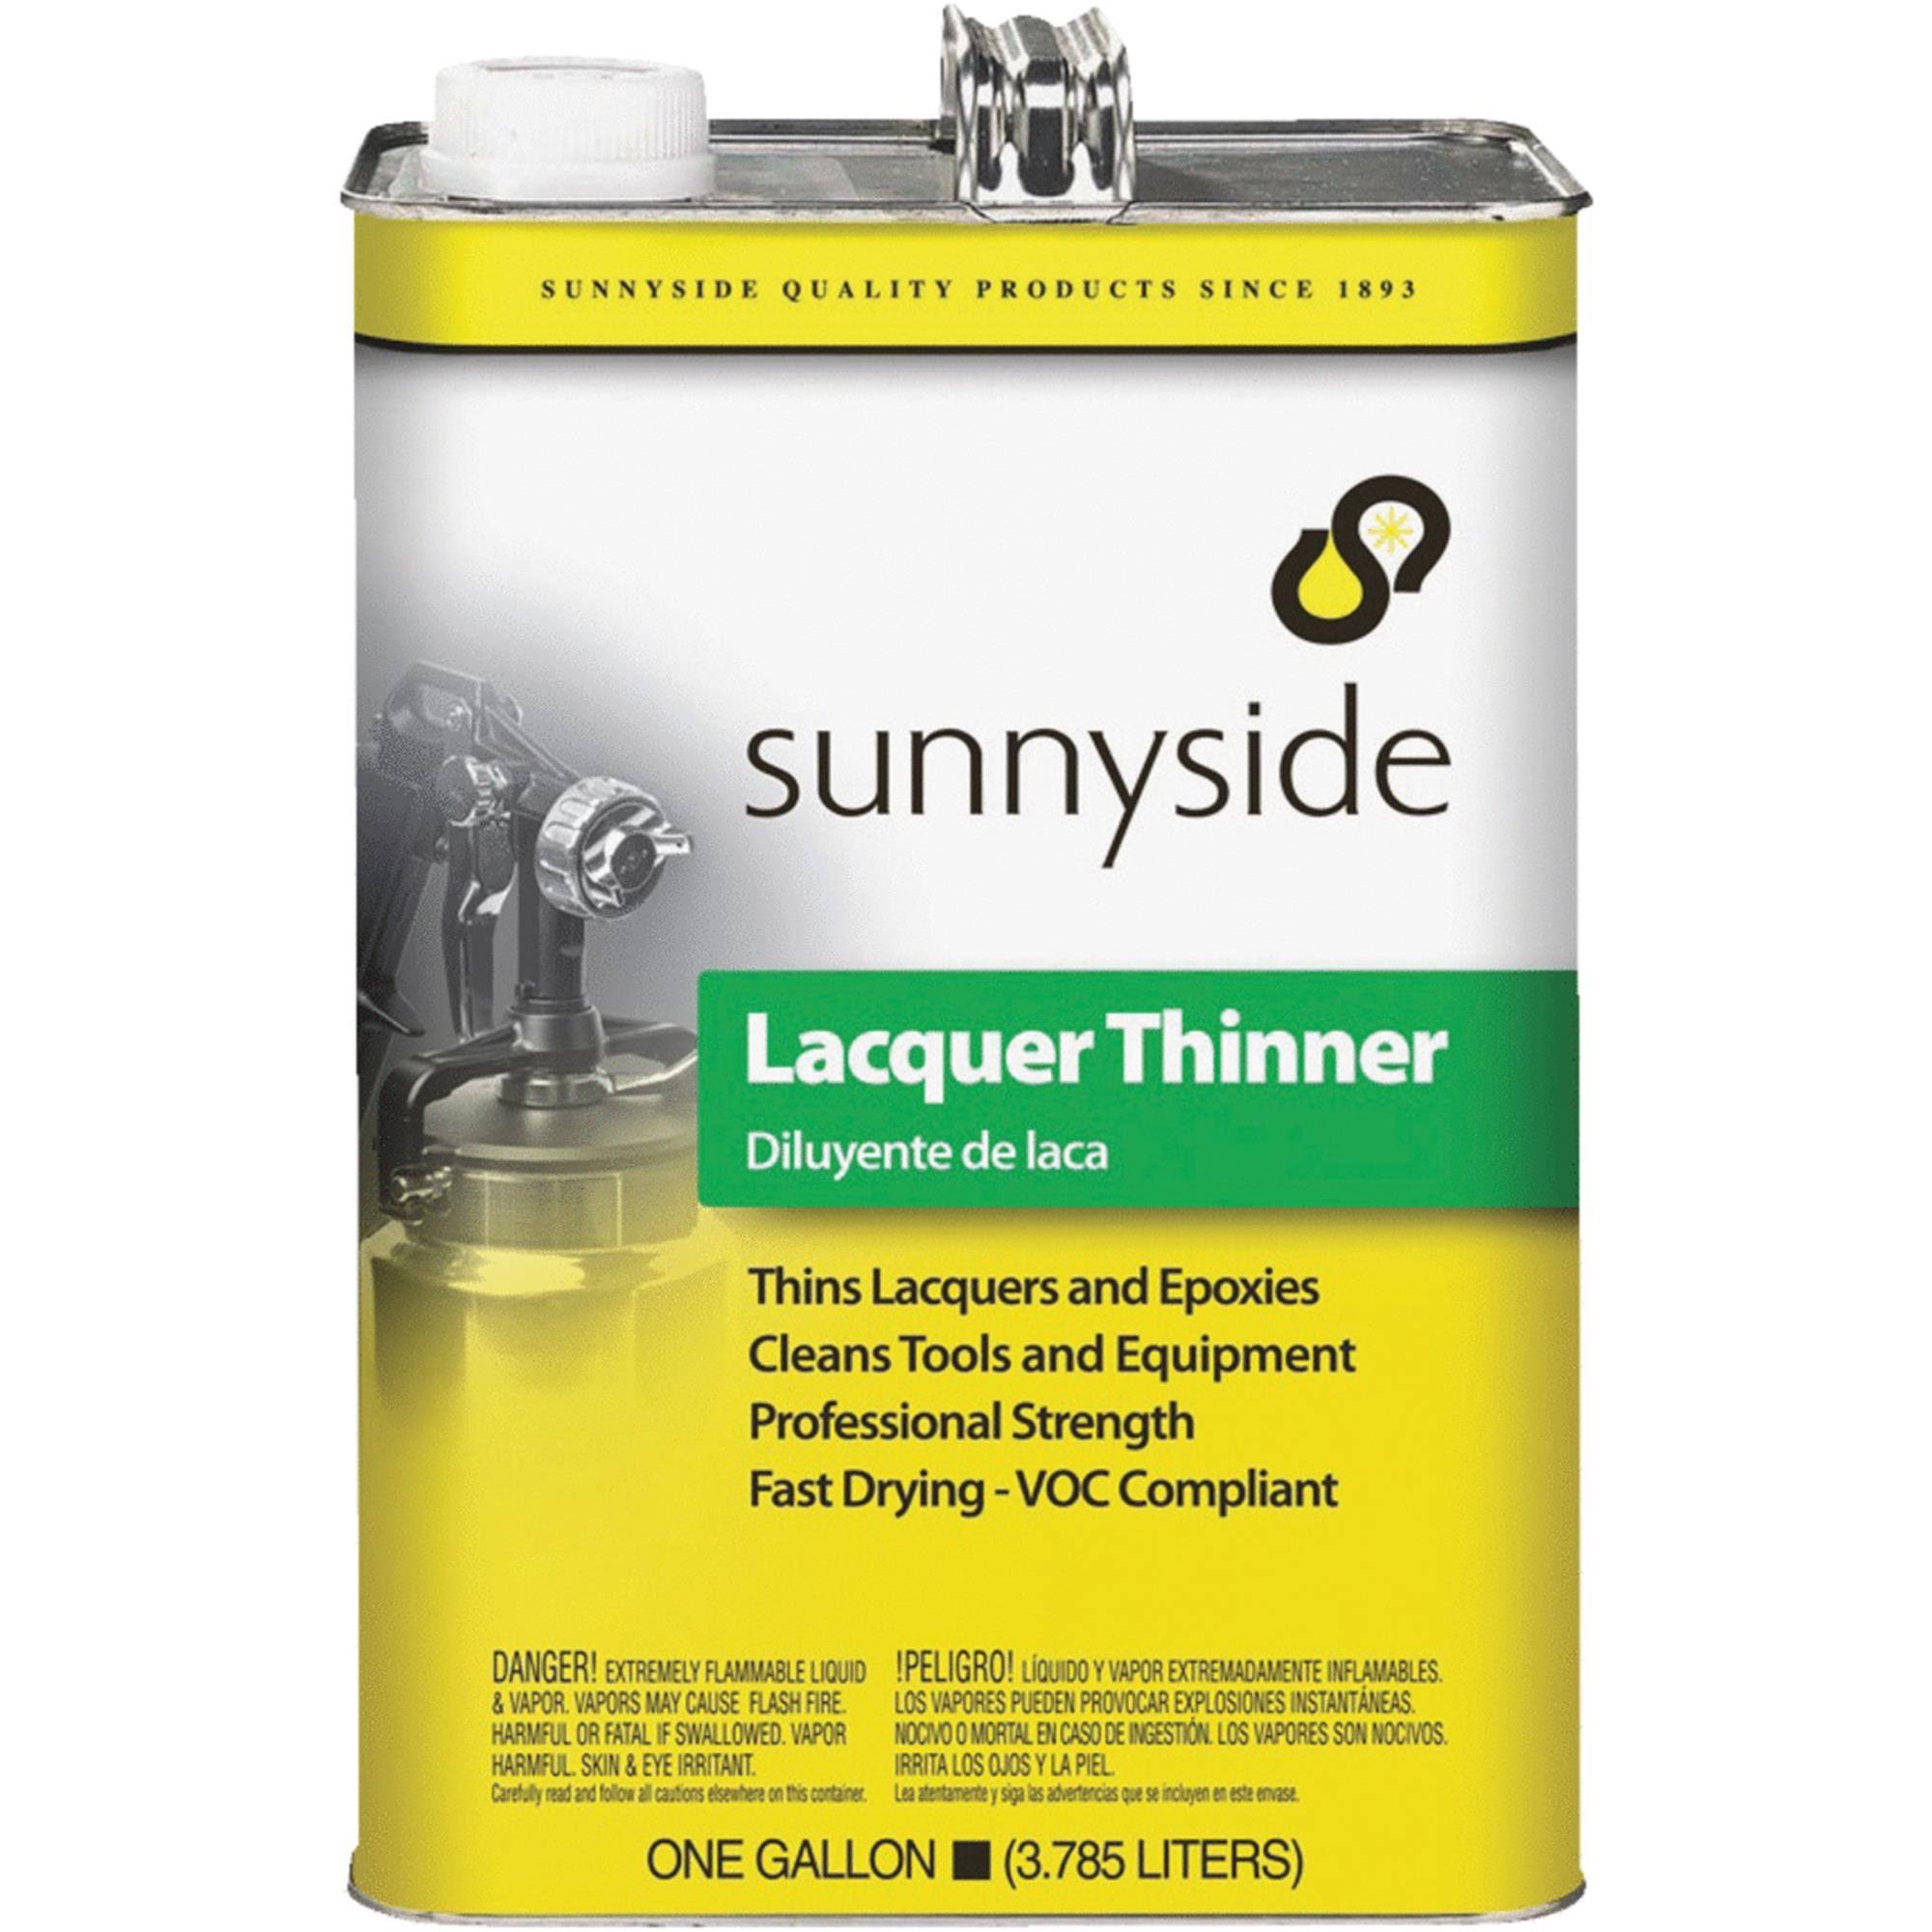 Sunnyside 477G1 Lacquer Thinner, 3.8L | Garage | Delivery Guaranteed | Free Shipping On All Orders | Best Price Guarantee